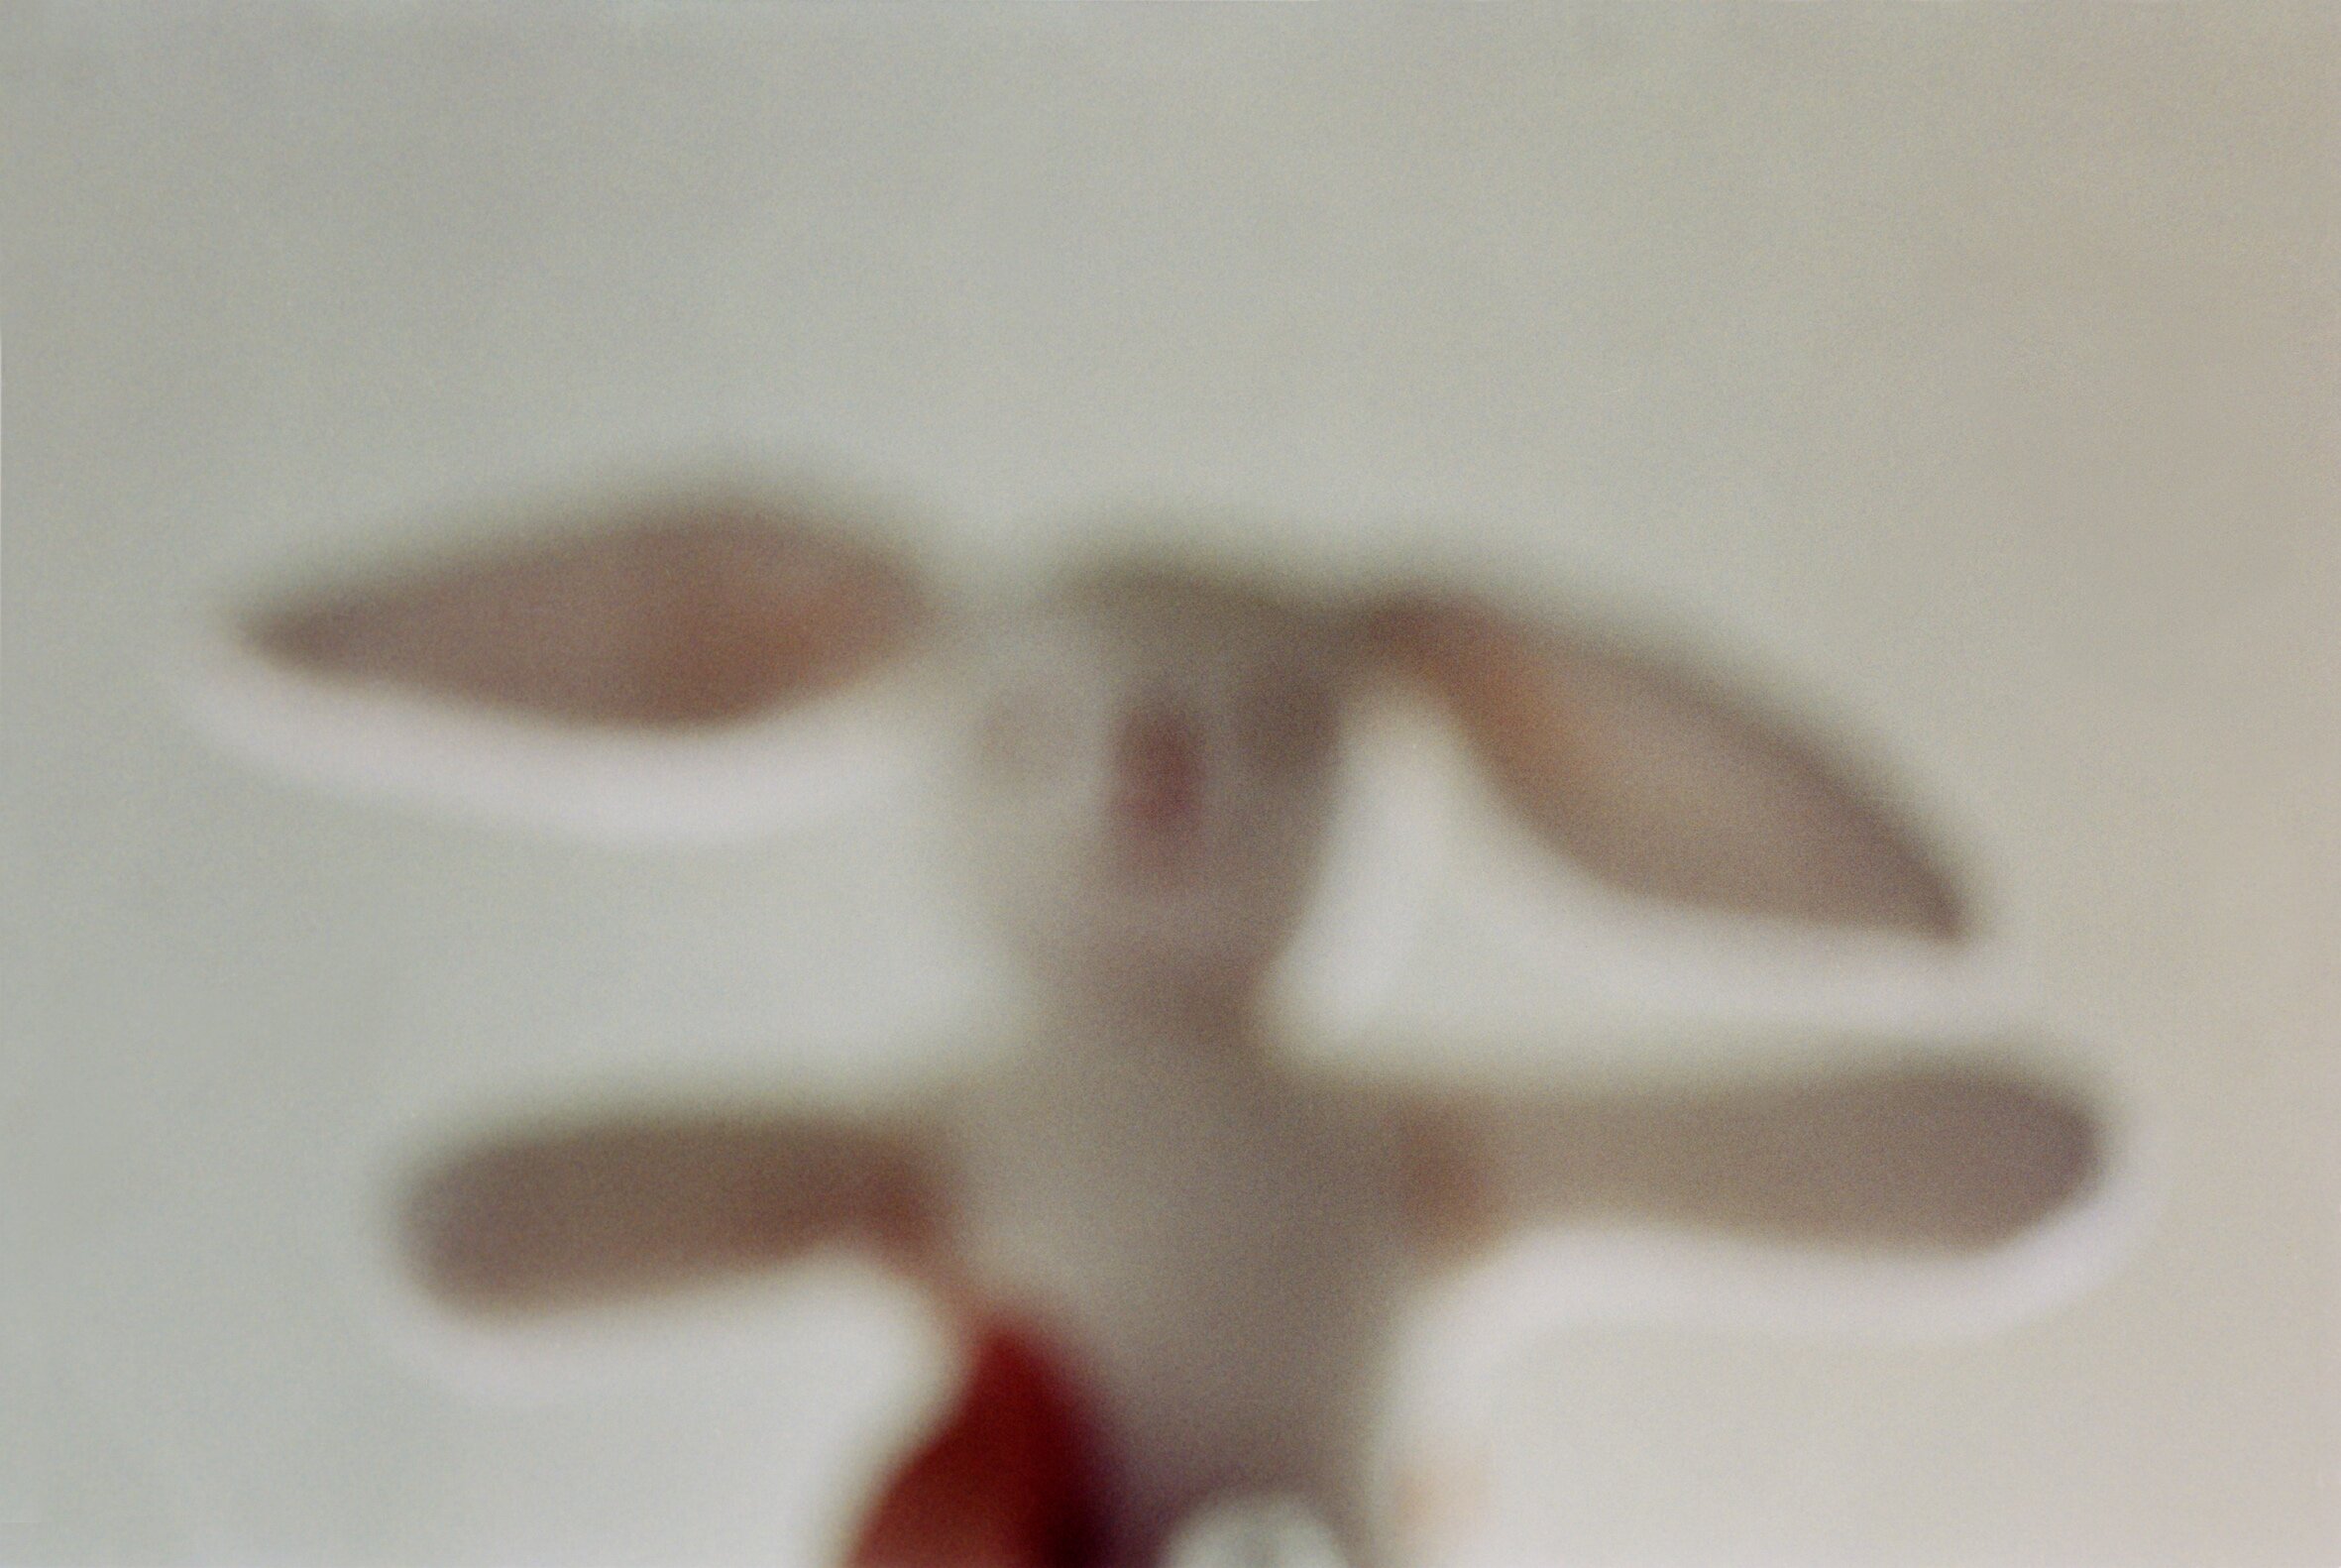   The rabbit,  2001  Archival pigment print on cotton paper  13 x 21.7 in. on 19.7 x 27.6 in. paper (33 x 55 cm. on  50 x 70 cm.) 